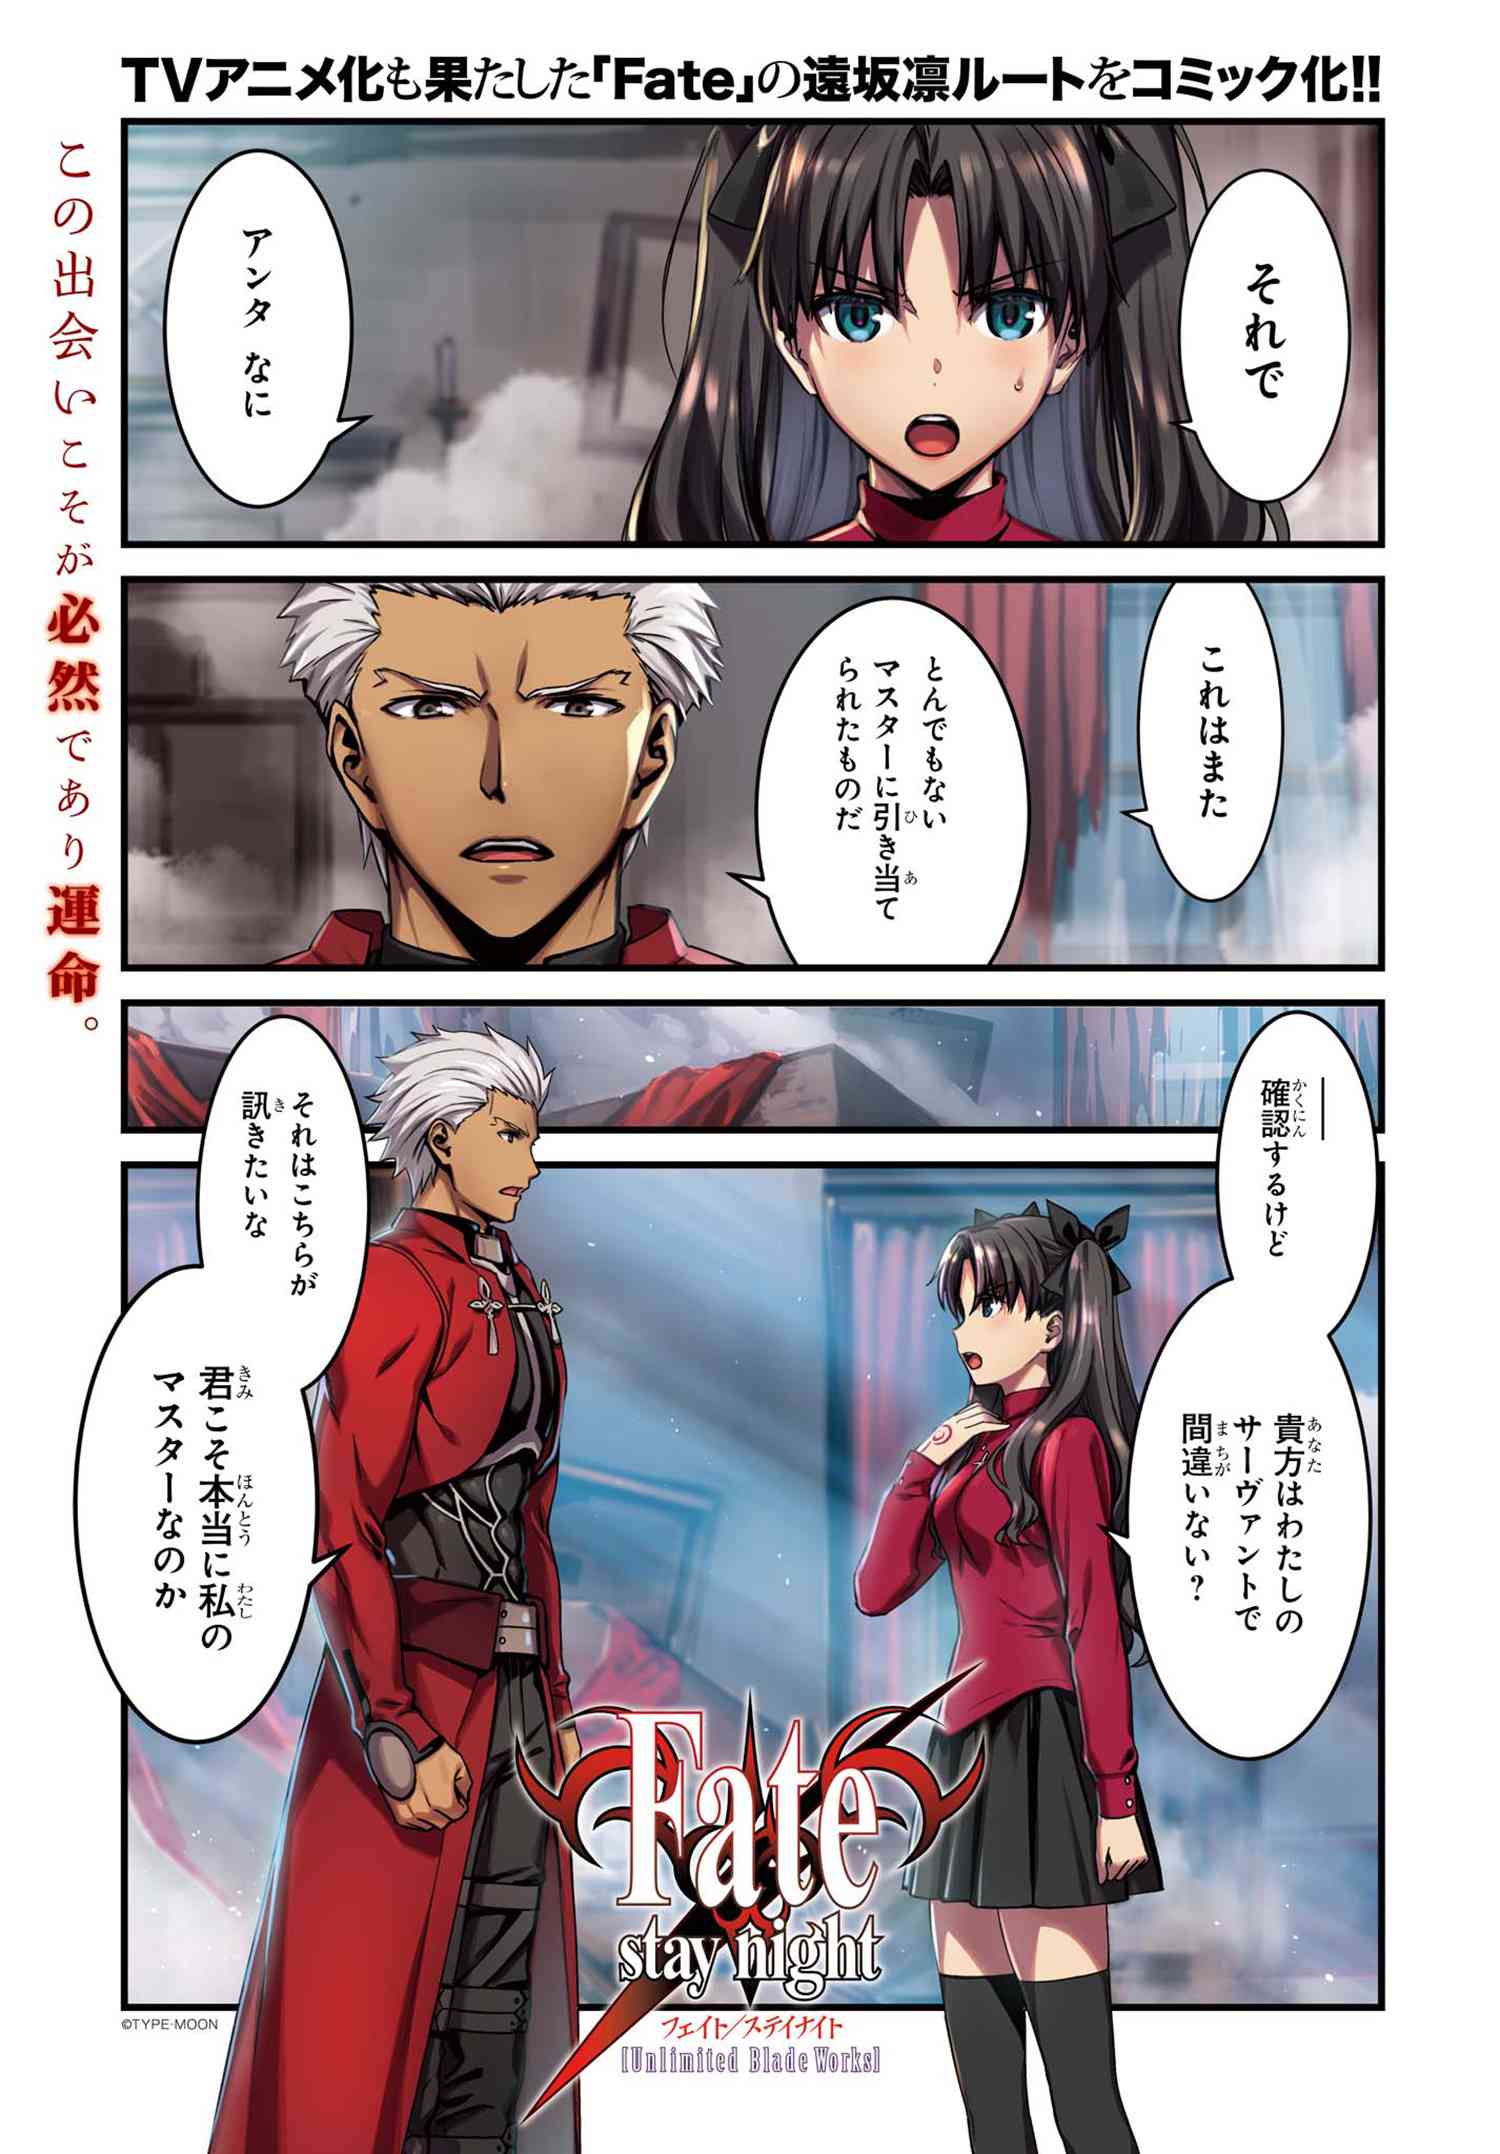 Fate Stay Night Unlimited Blade Works 1 1 プロローグ 前編 Type Moonコミックエース 無料で漫画が読めるオンラインマガジン